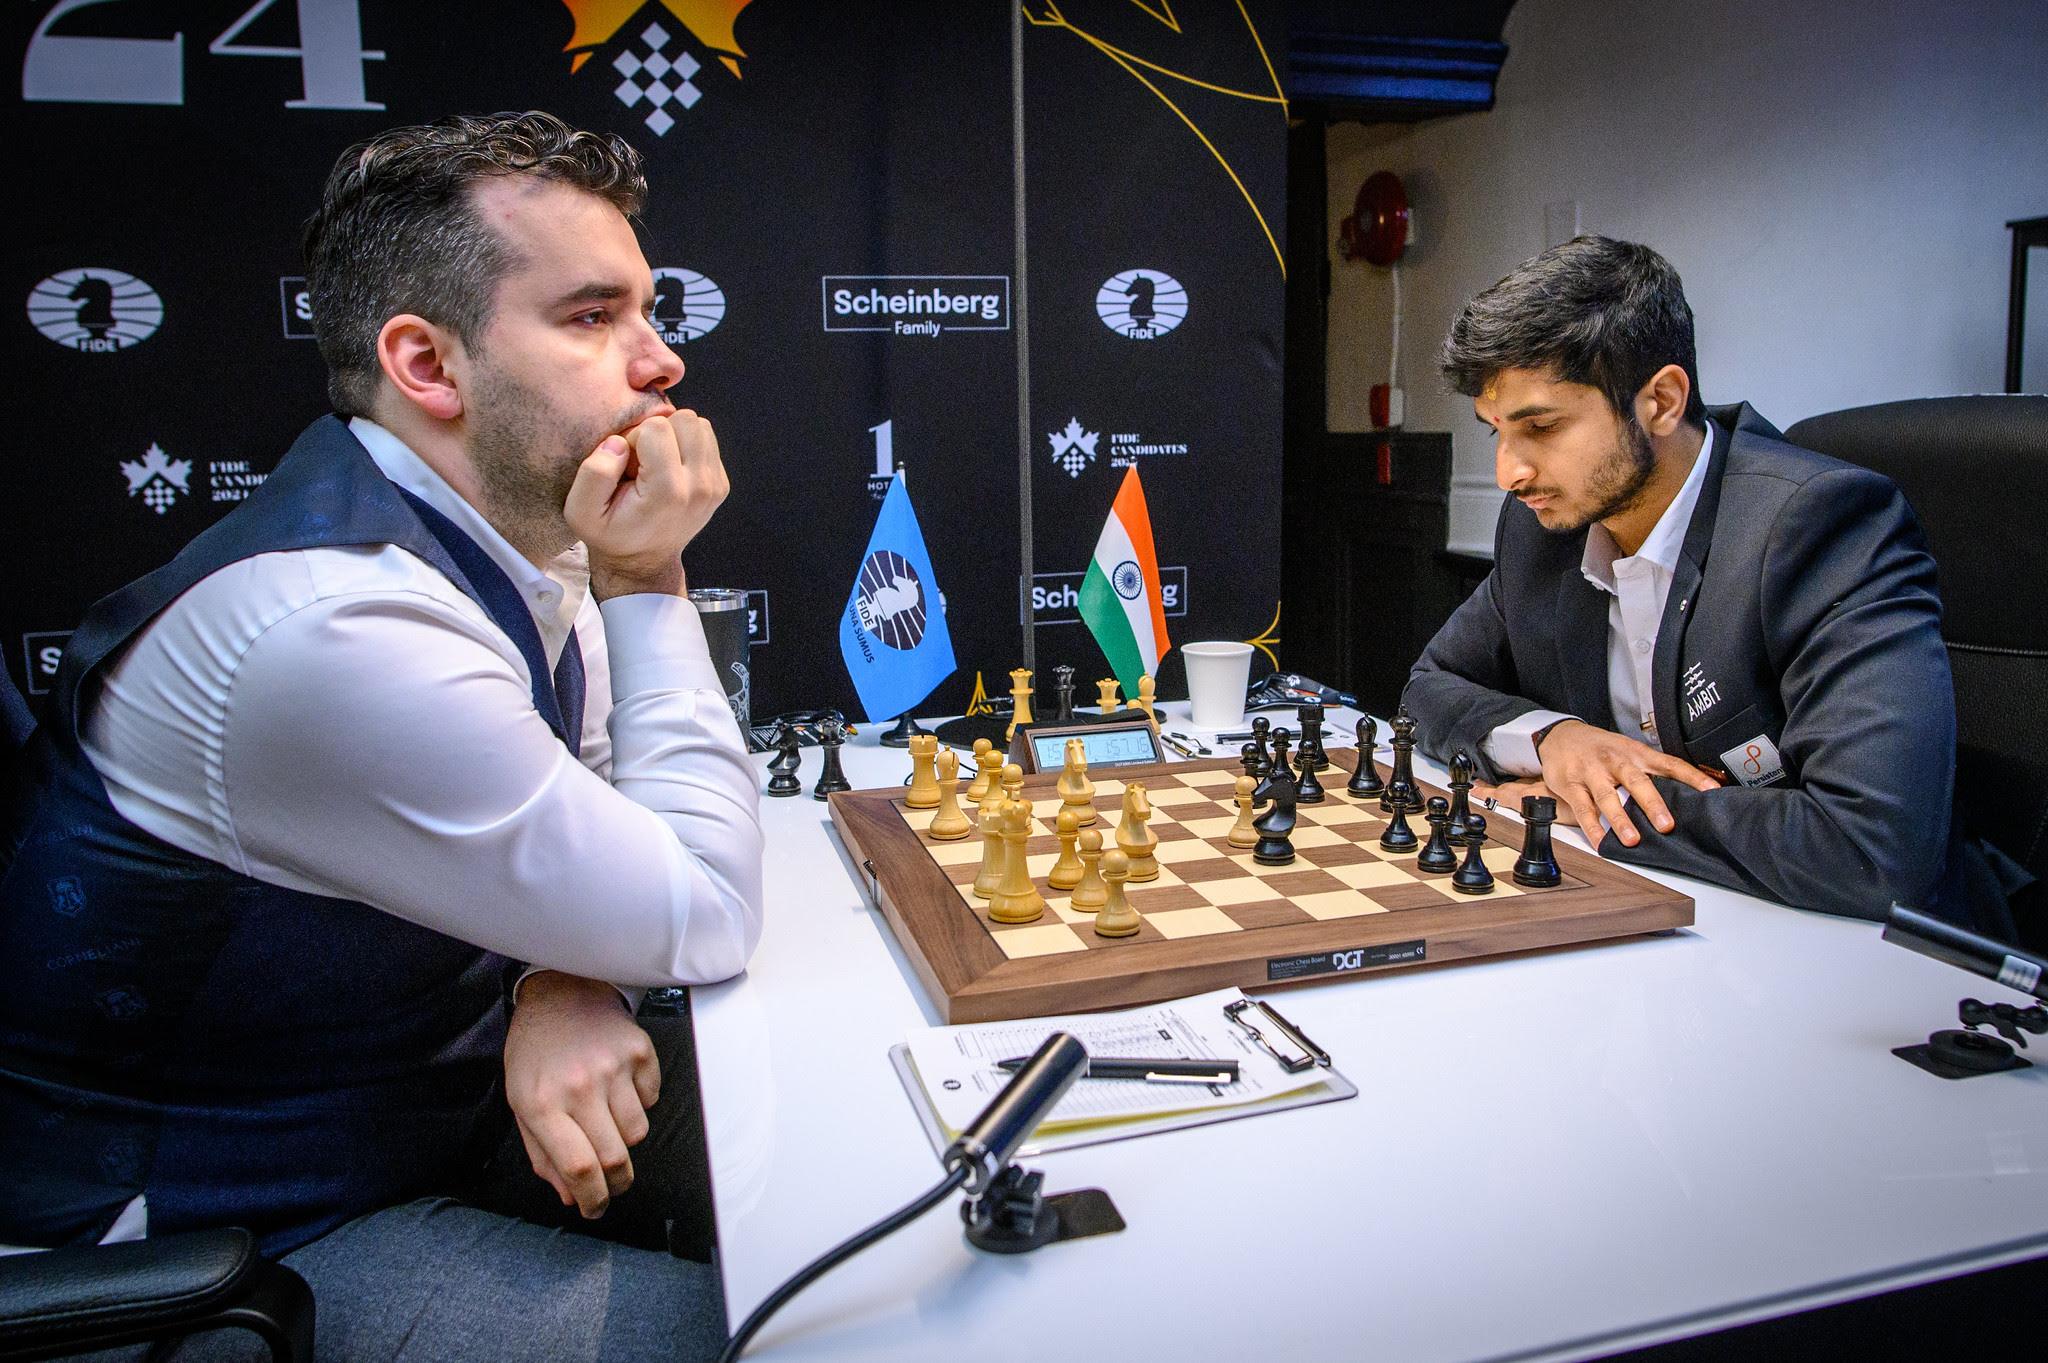 Nepomniachtchi and Tan Zhongyi Sole Leaders Entering the Rest Day - FIDE Candidates